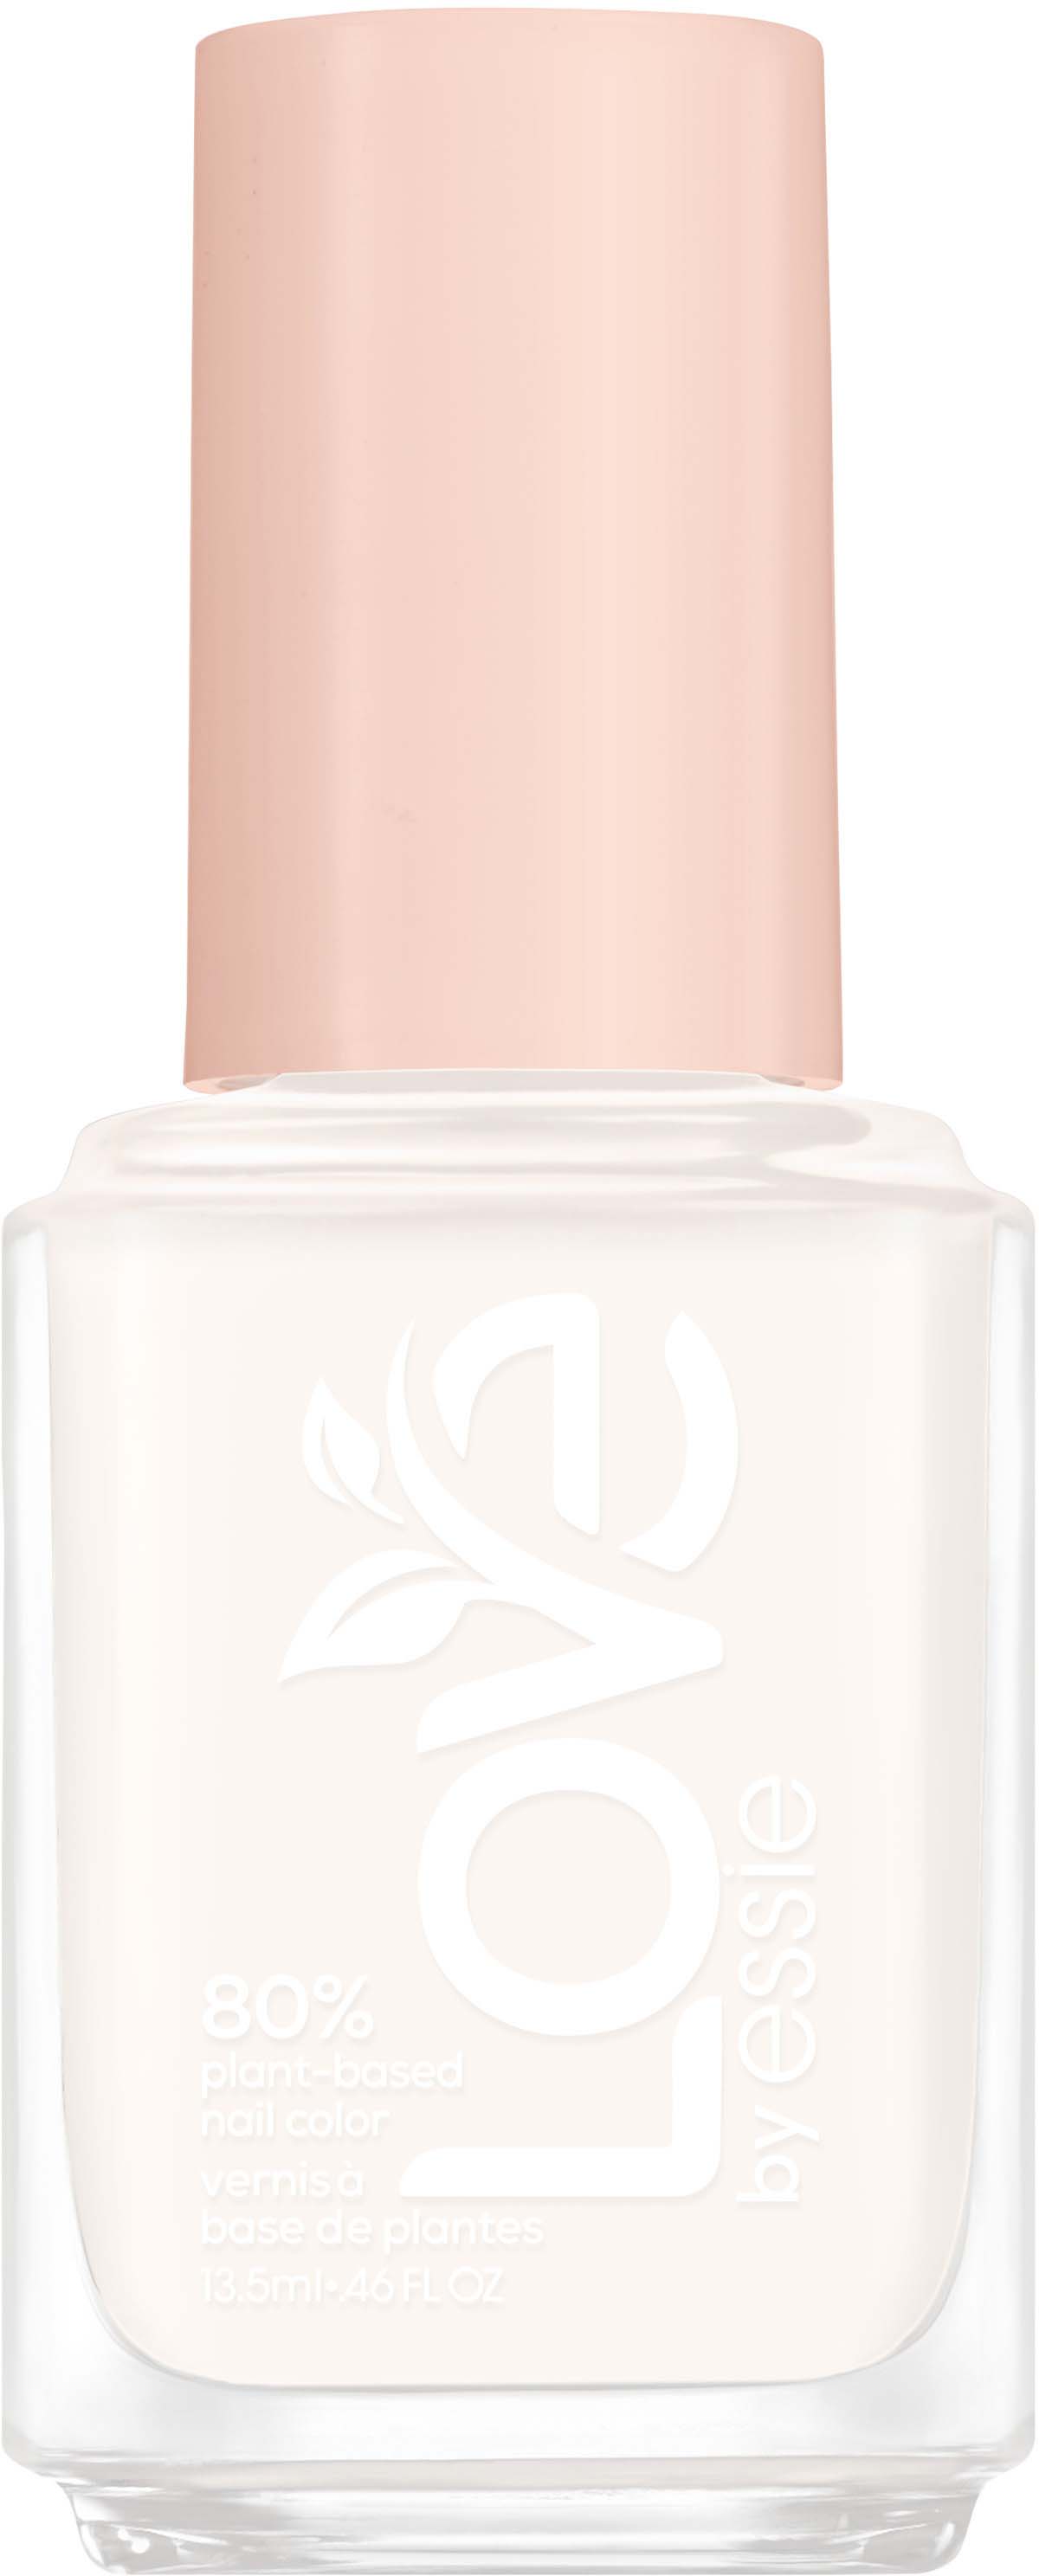 Essie LOVE Plant-based Color Essie Nail 120 I Moment Am The by 80